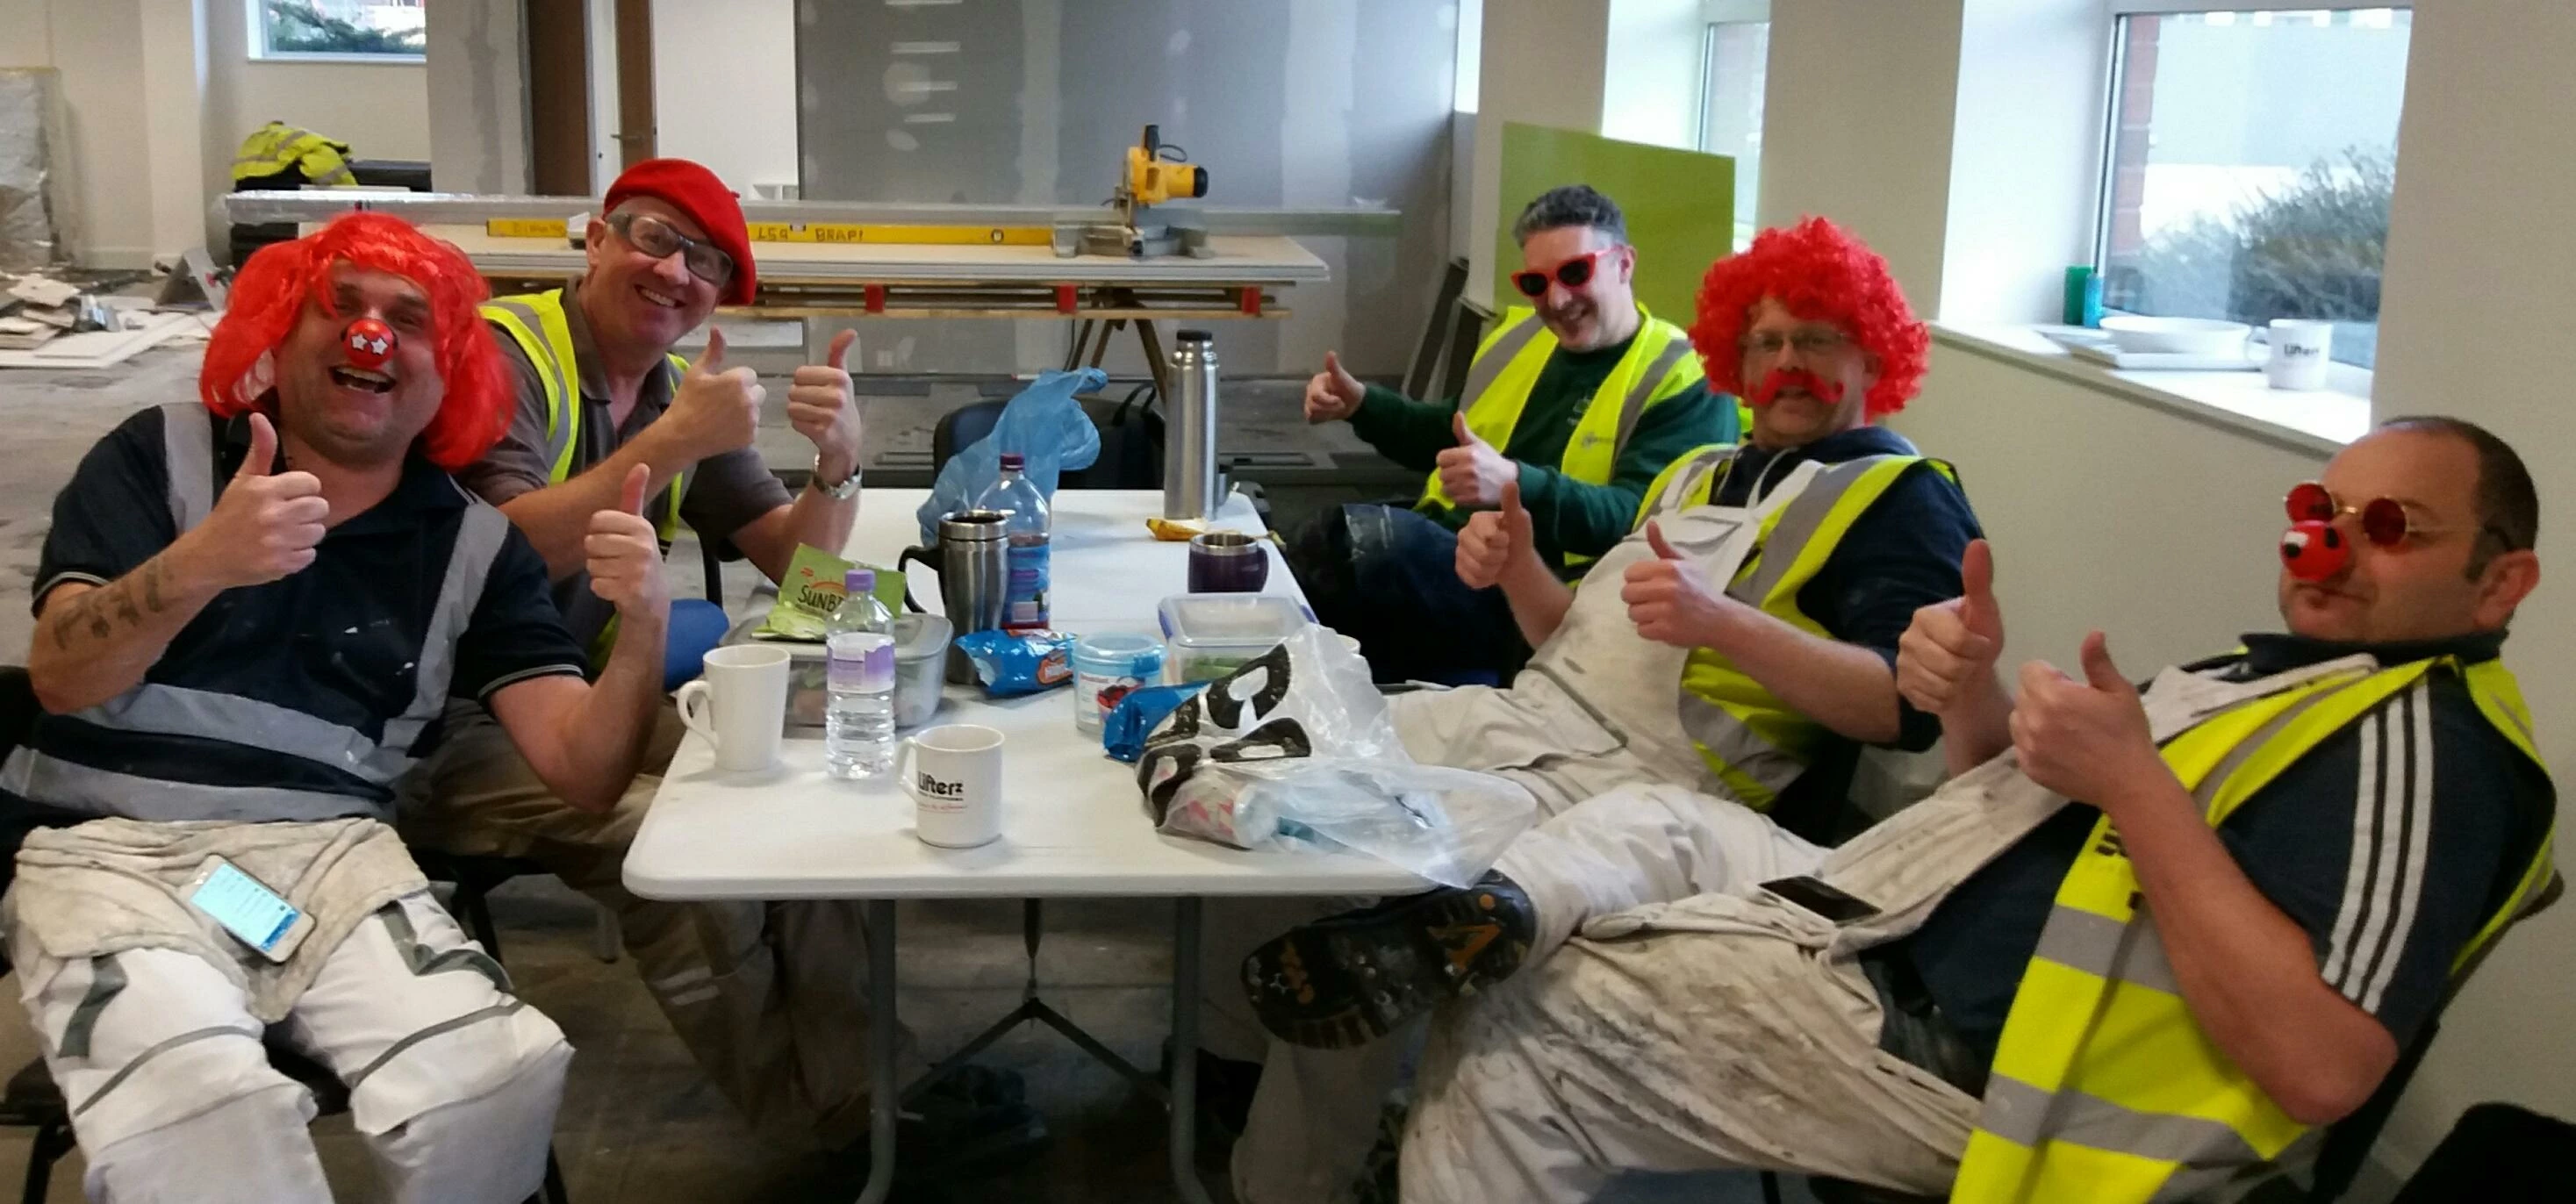 Getting into the spirit of Red Nose Day - Ben Johnson Interiors workers left to right: Nick Kelly, D